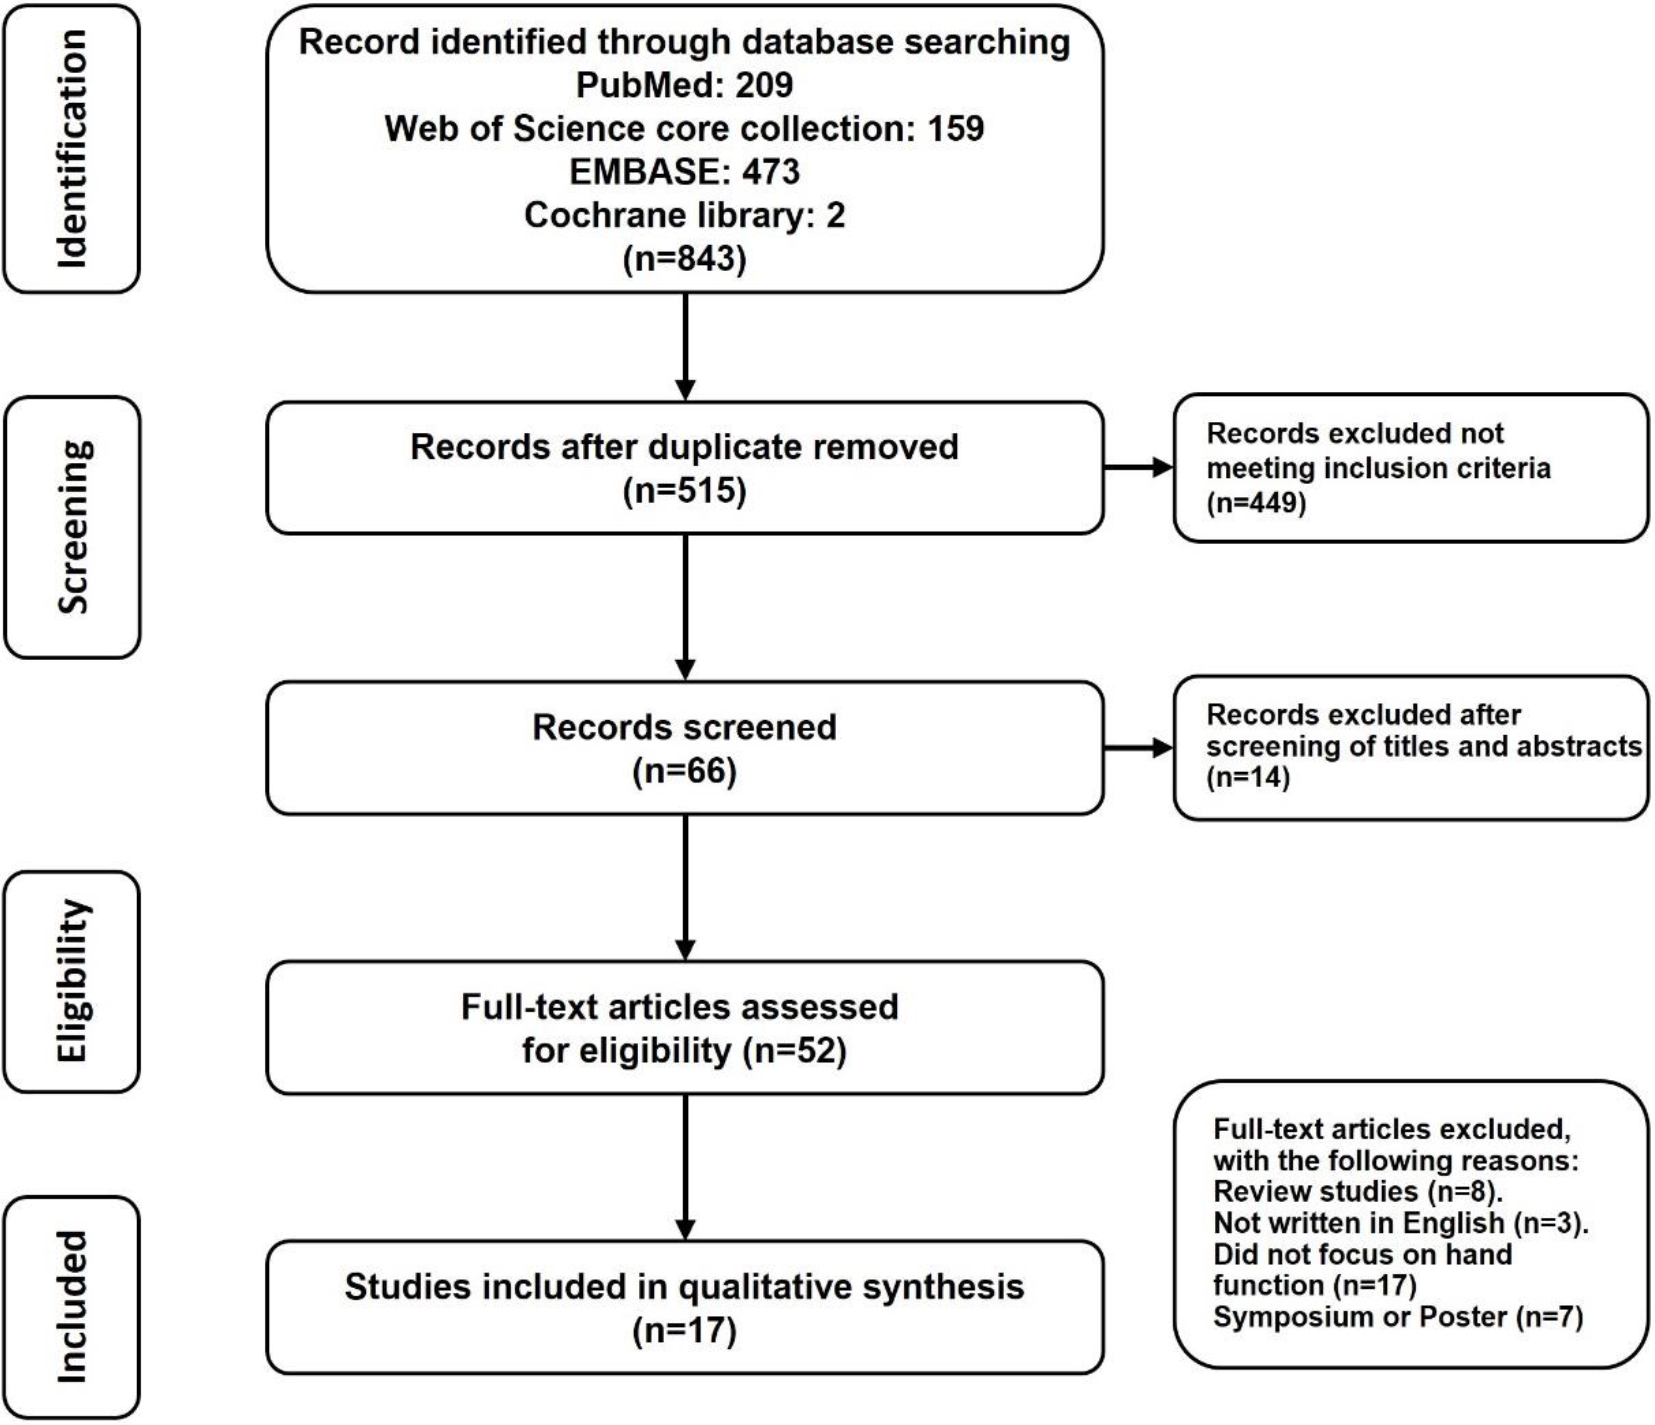 PRISMA flow diagram for trials included and excluded from the systematic review.